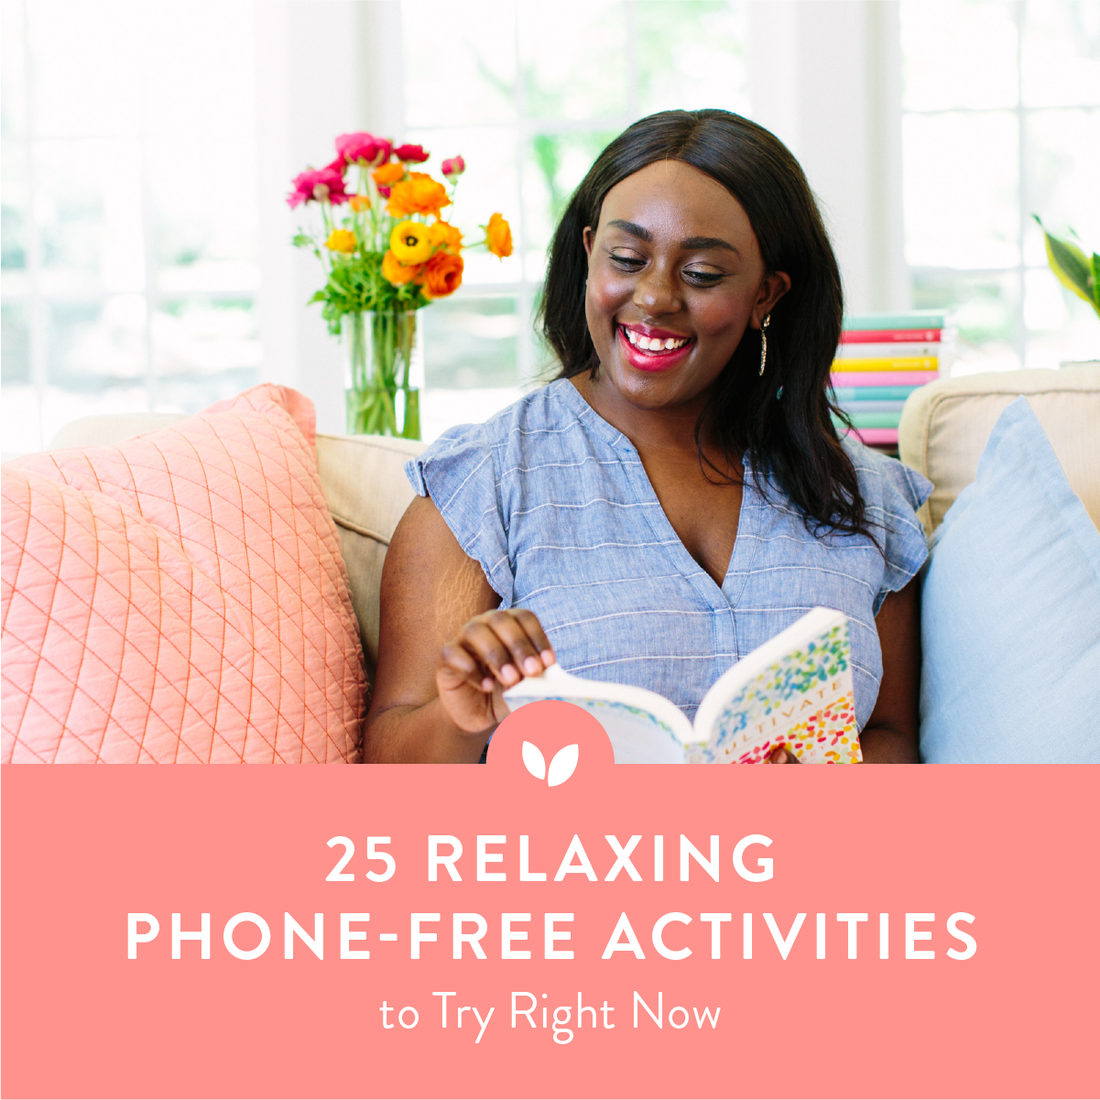 25 Relaxing Phone-Free Activities to Try Right Now